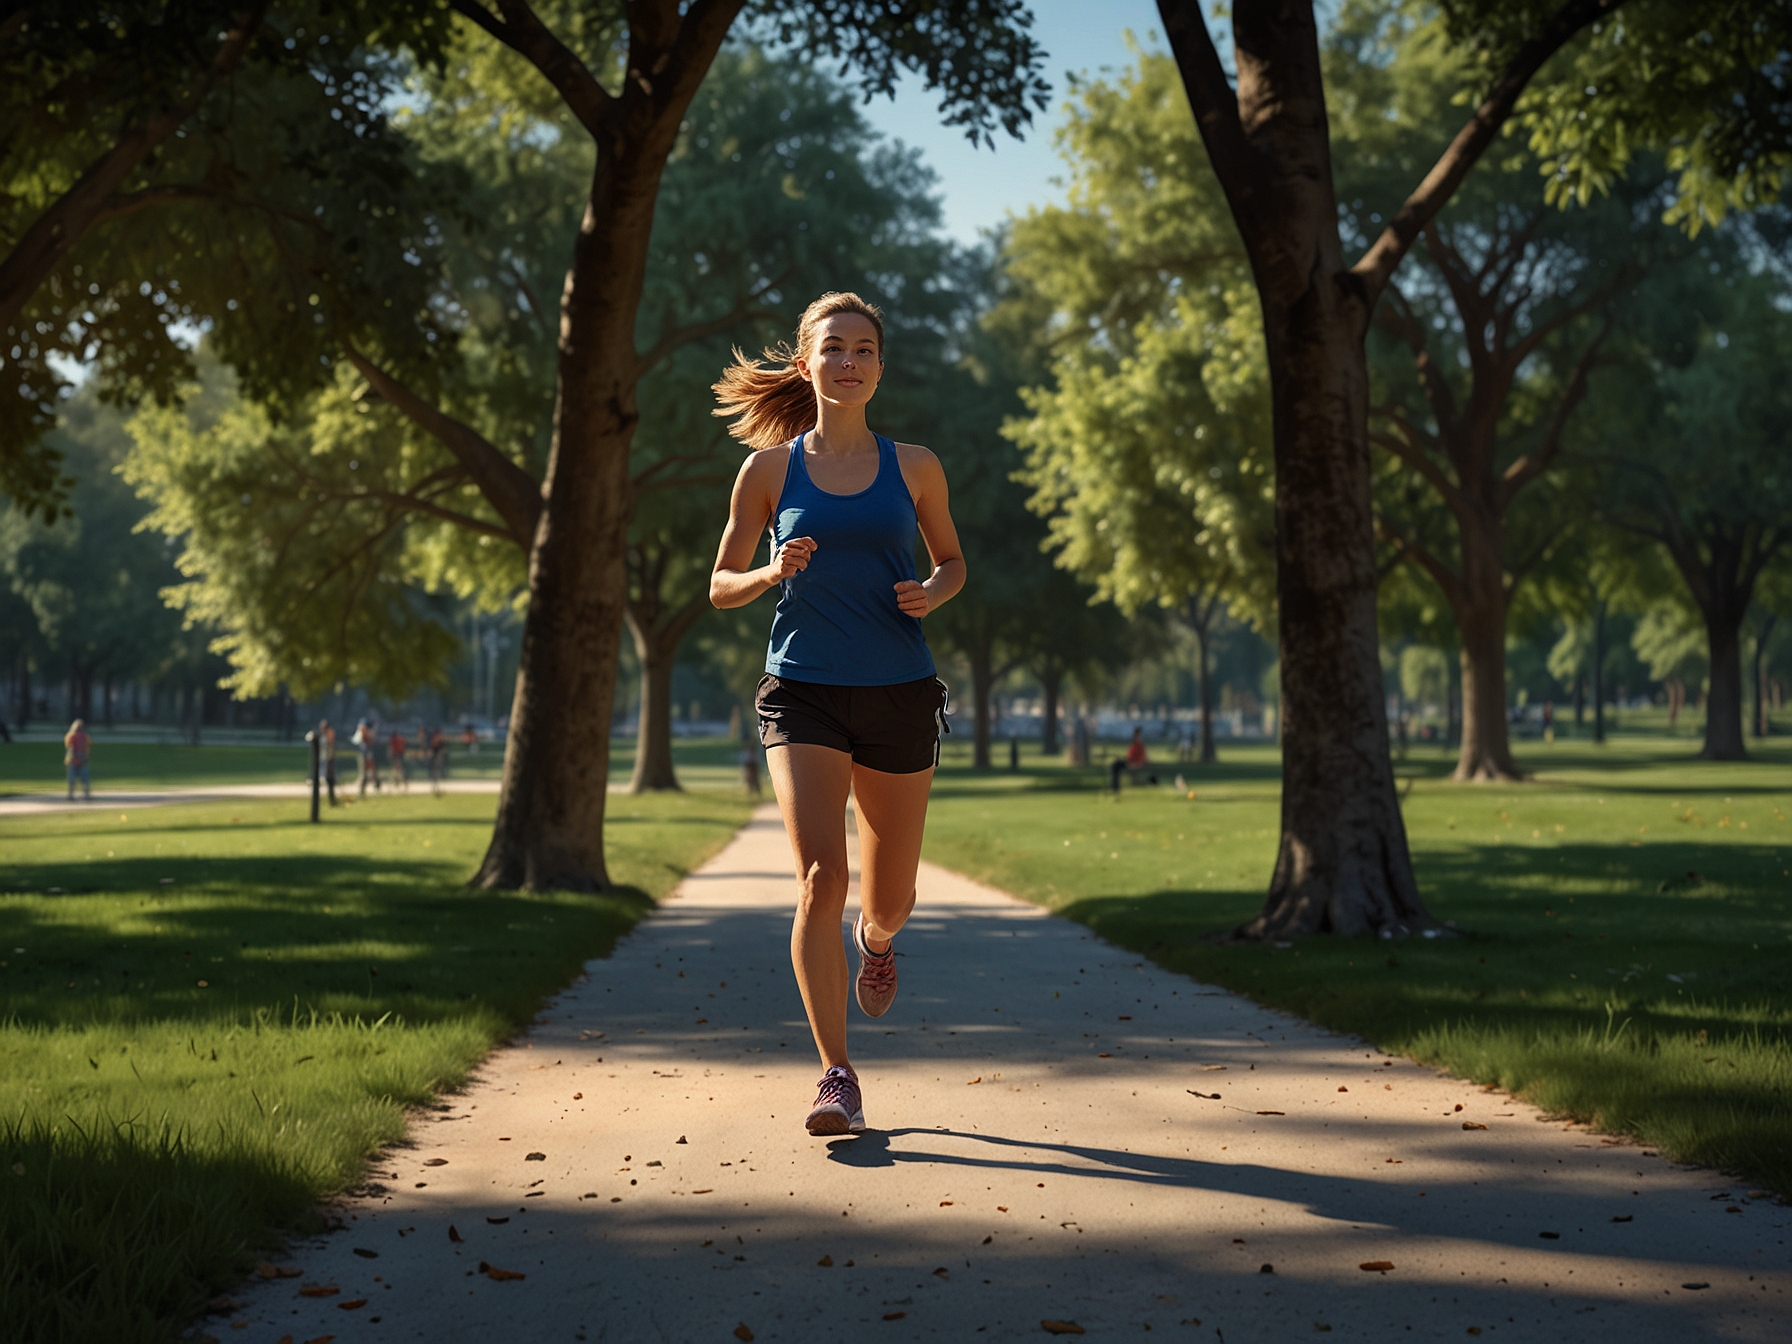 An illustration showing a person jogging in a park, symbolizing regular exercise. The image highlights aerobic activities like walking, swimming, and cycling that improve blood circulation and reduce cardiovascular disease risk.